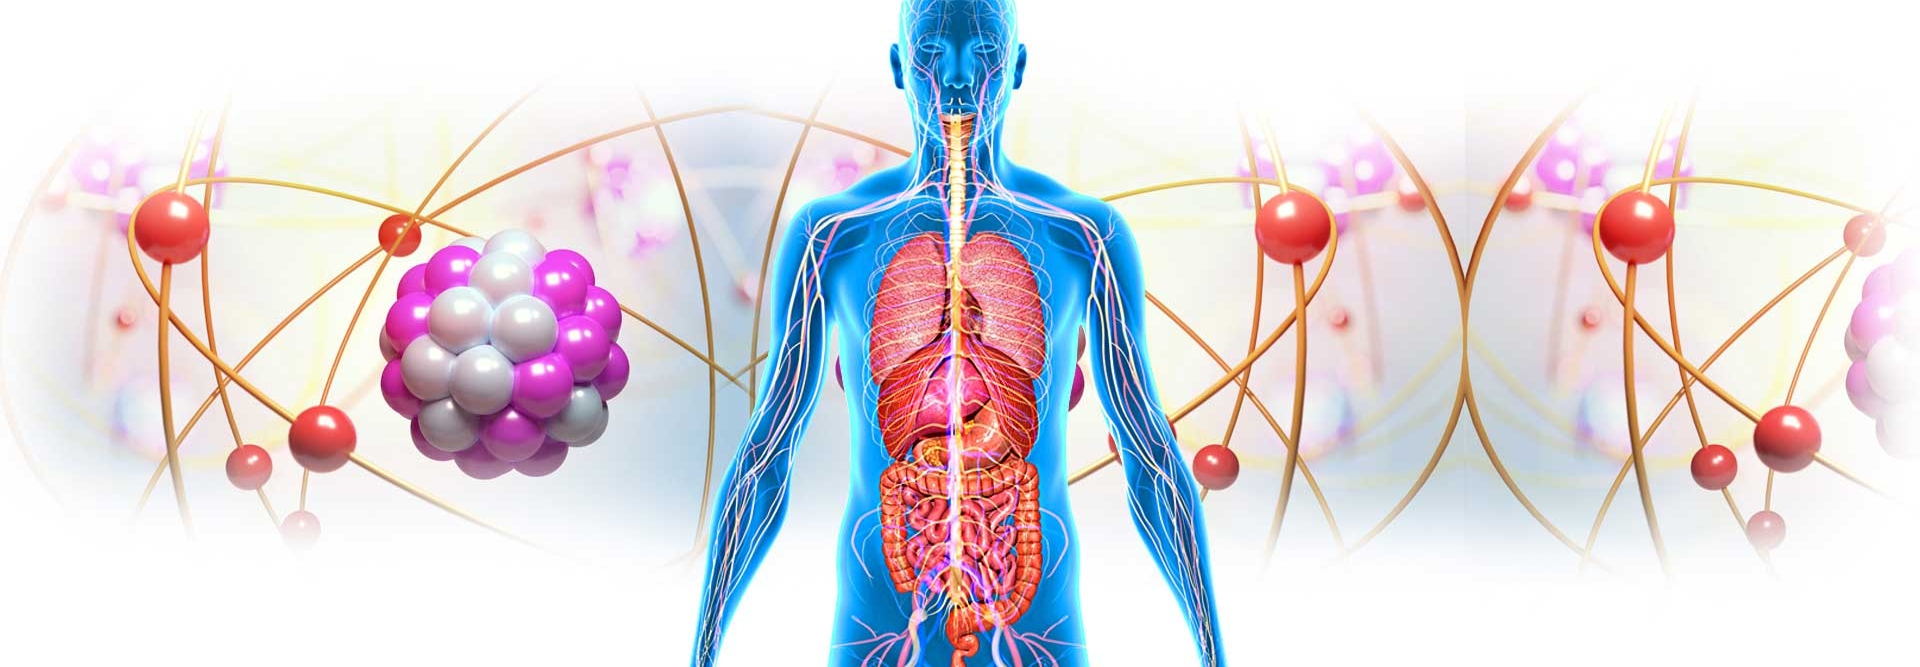 At a cellular level the human body is a complex energy field system